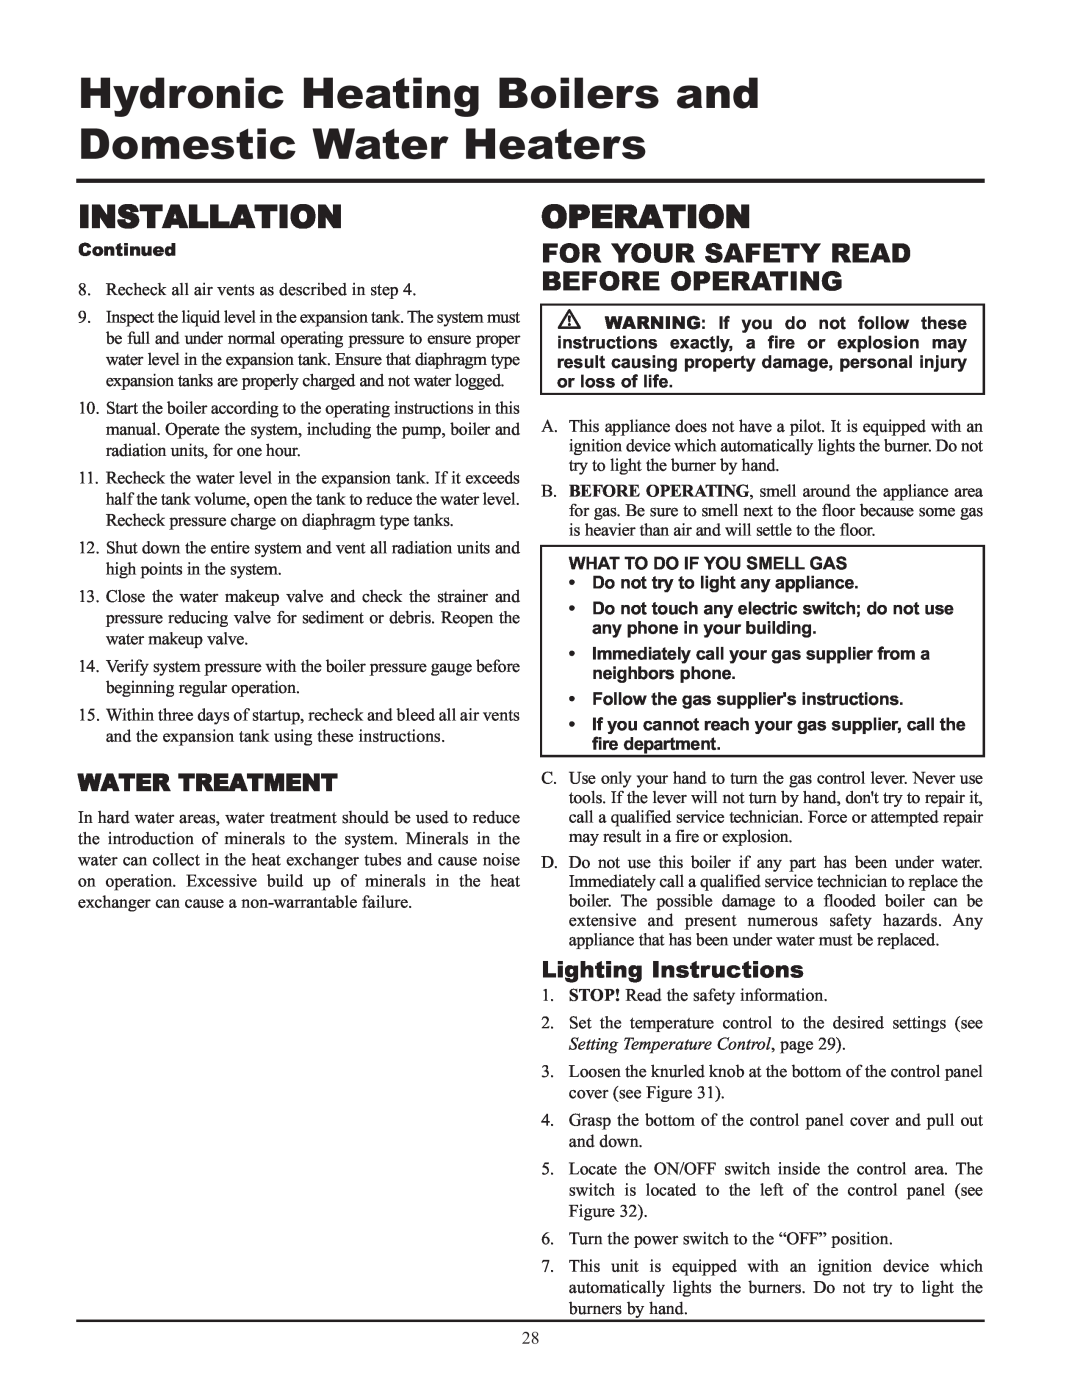 Lochinvar 065, 495 Operation, For Your Safety Read Before Operating, Water Treatment, Lighting Instructions, Installation 